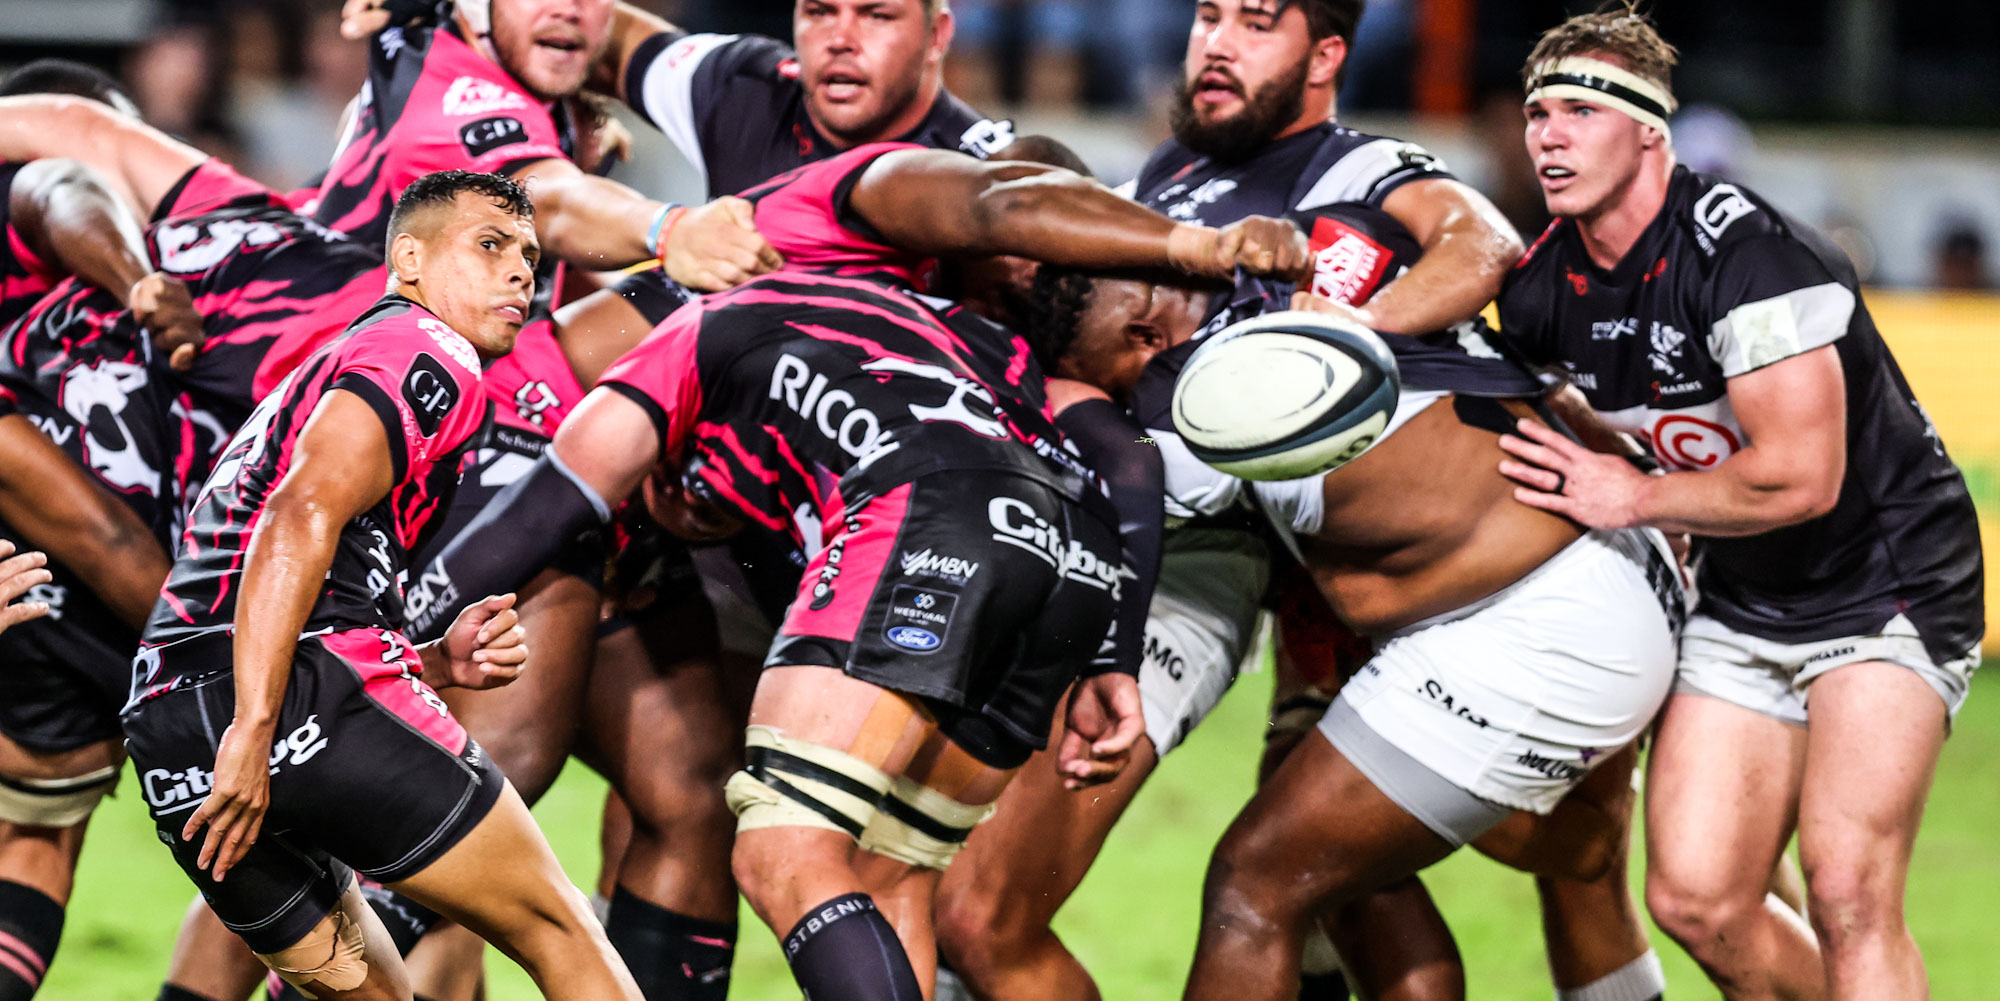 Chriswill September of the Airlink Pumas gets the ball away in their match against the Cell C Sharks last weekend.